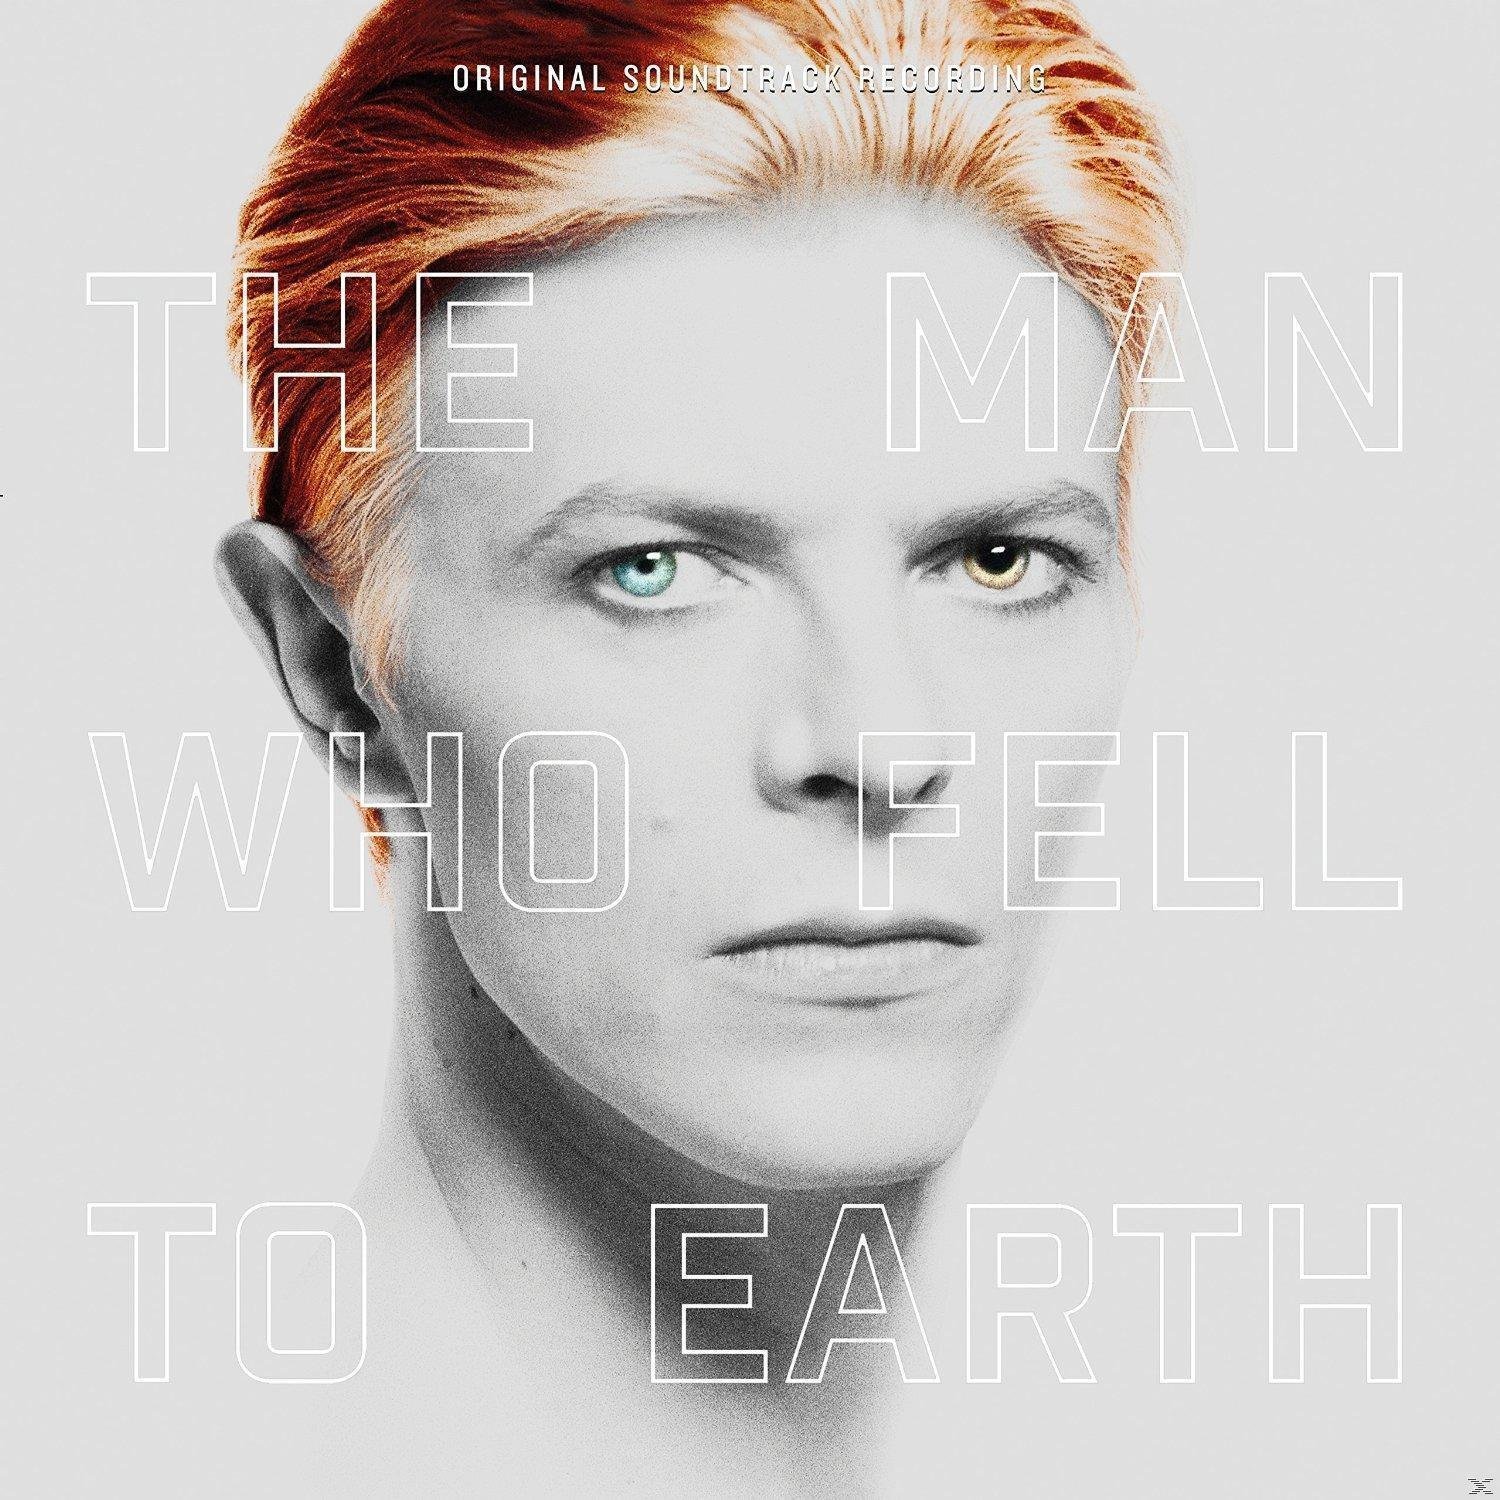 LP David Bowie - The Man Who Fell To Earth OST (Starring David Bowie) (2 LP + 2 CD)